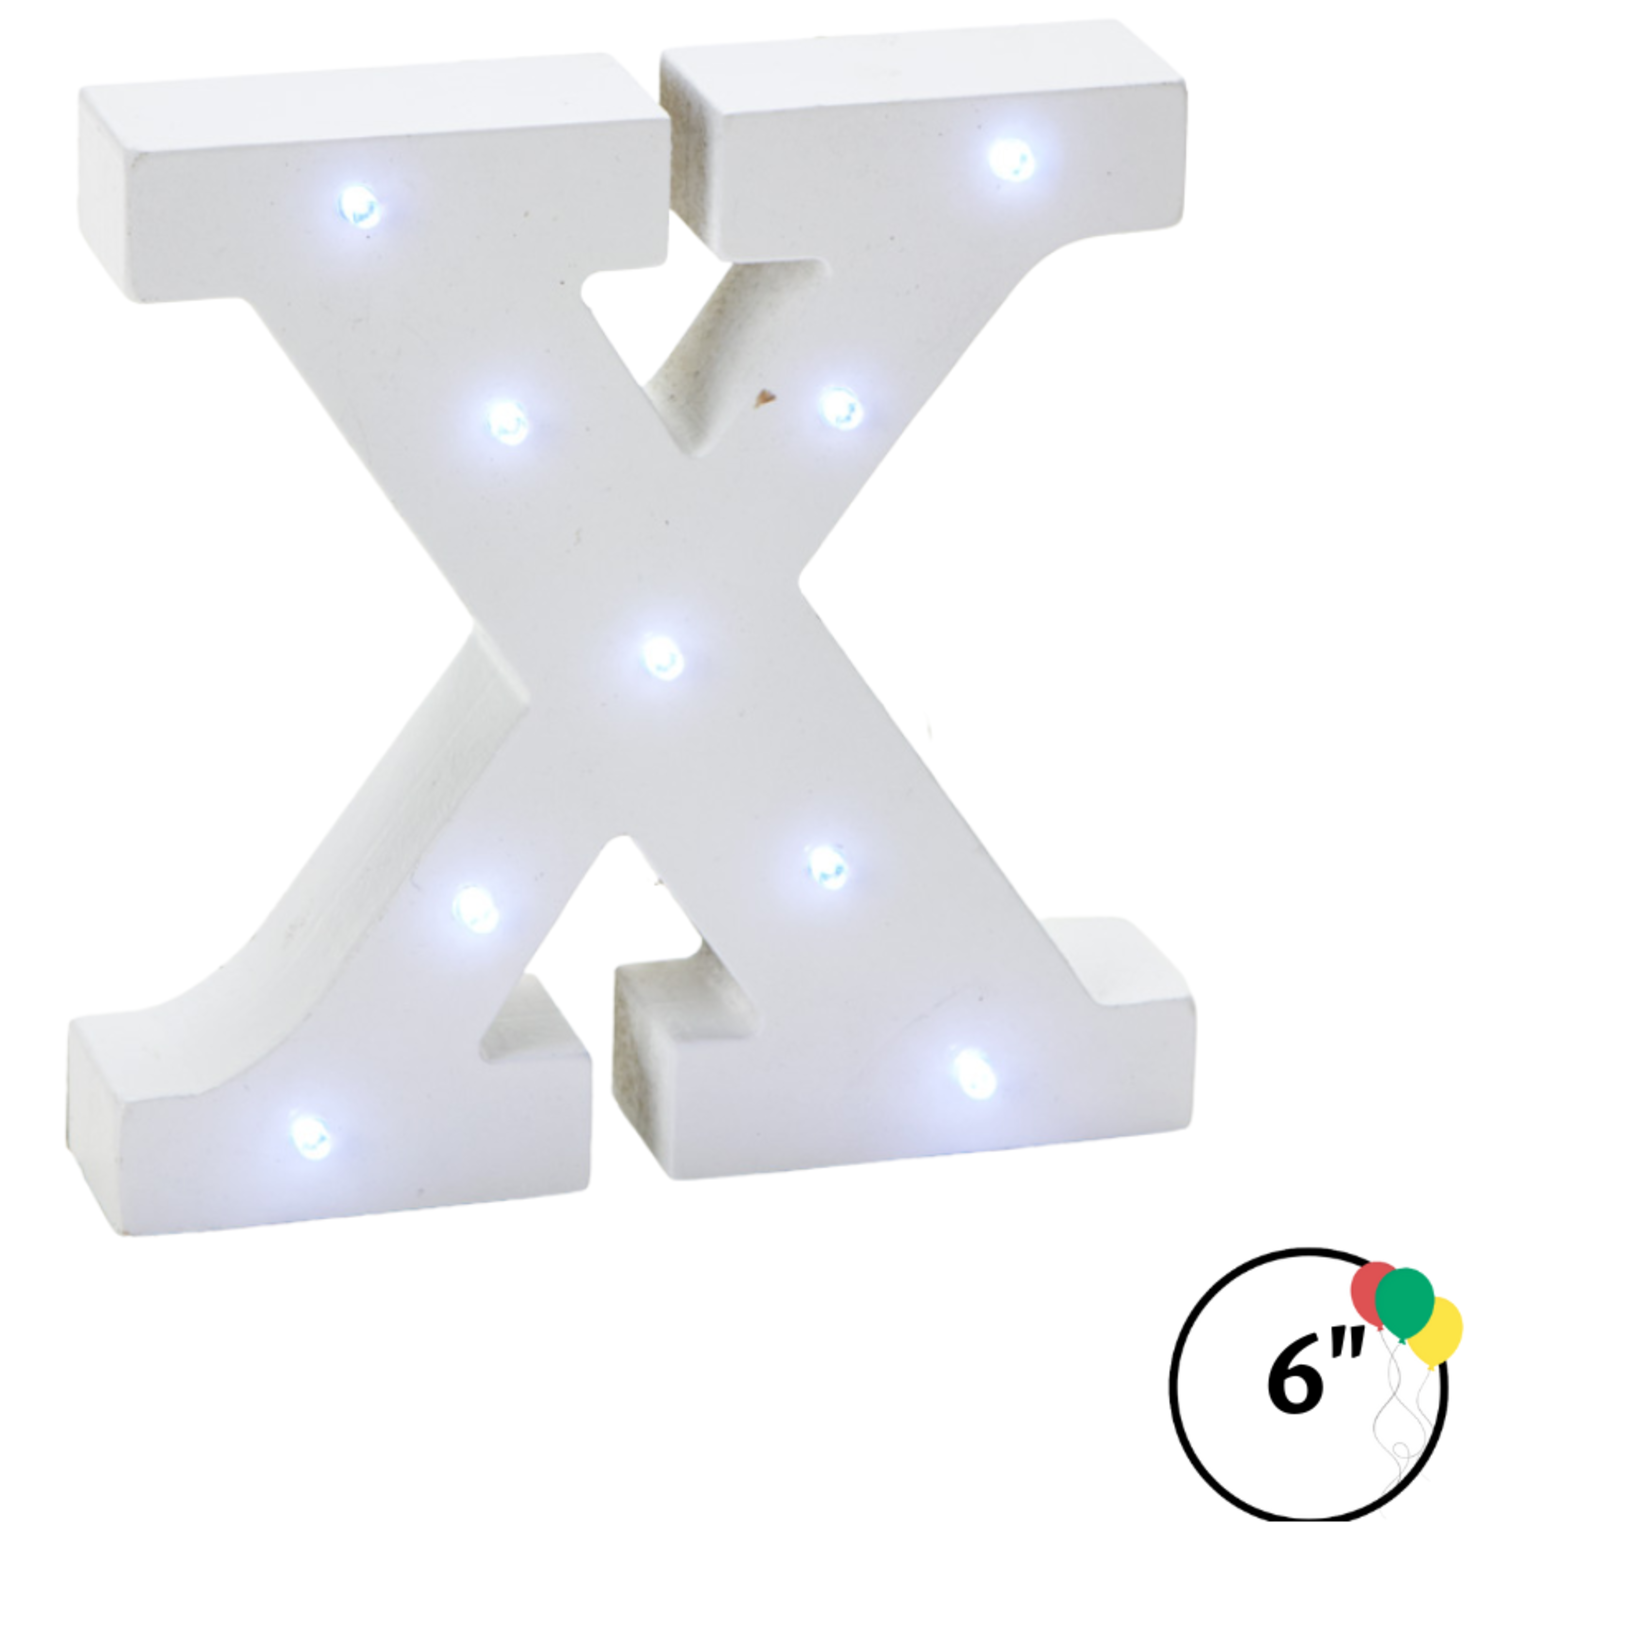 Wooden Vintage LED Marquee Freestanding Letter X - White